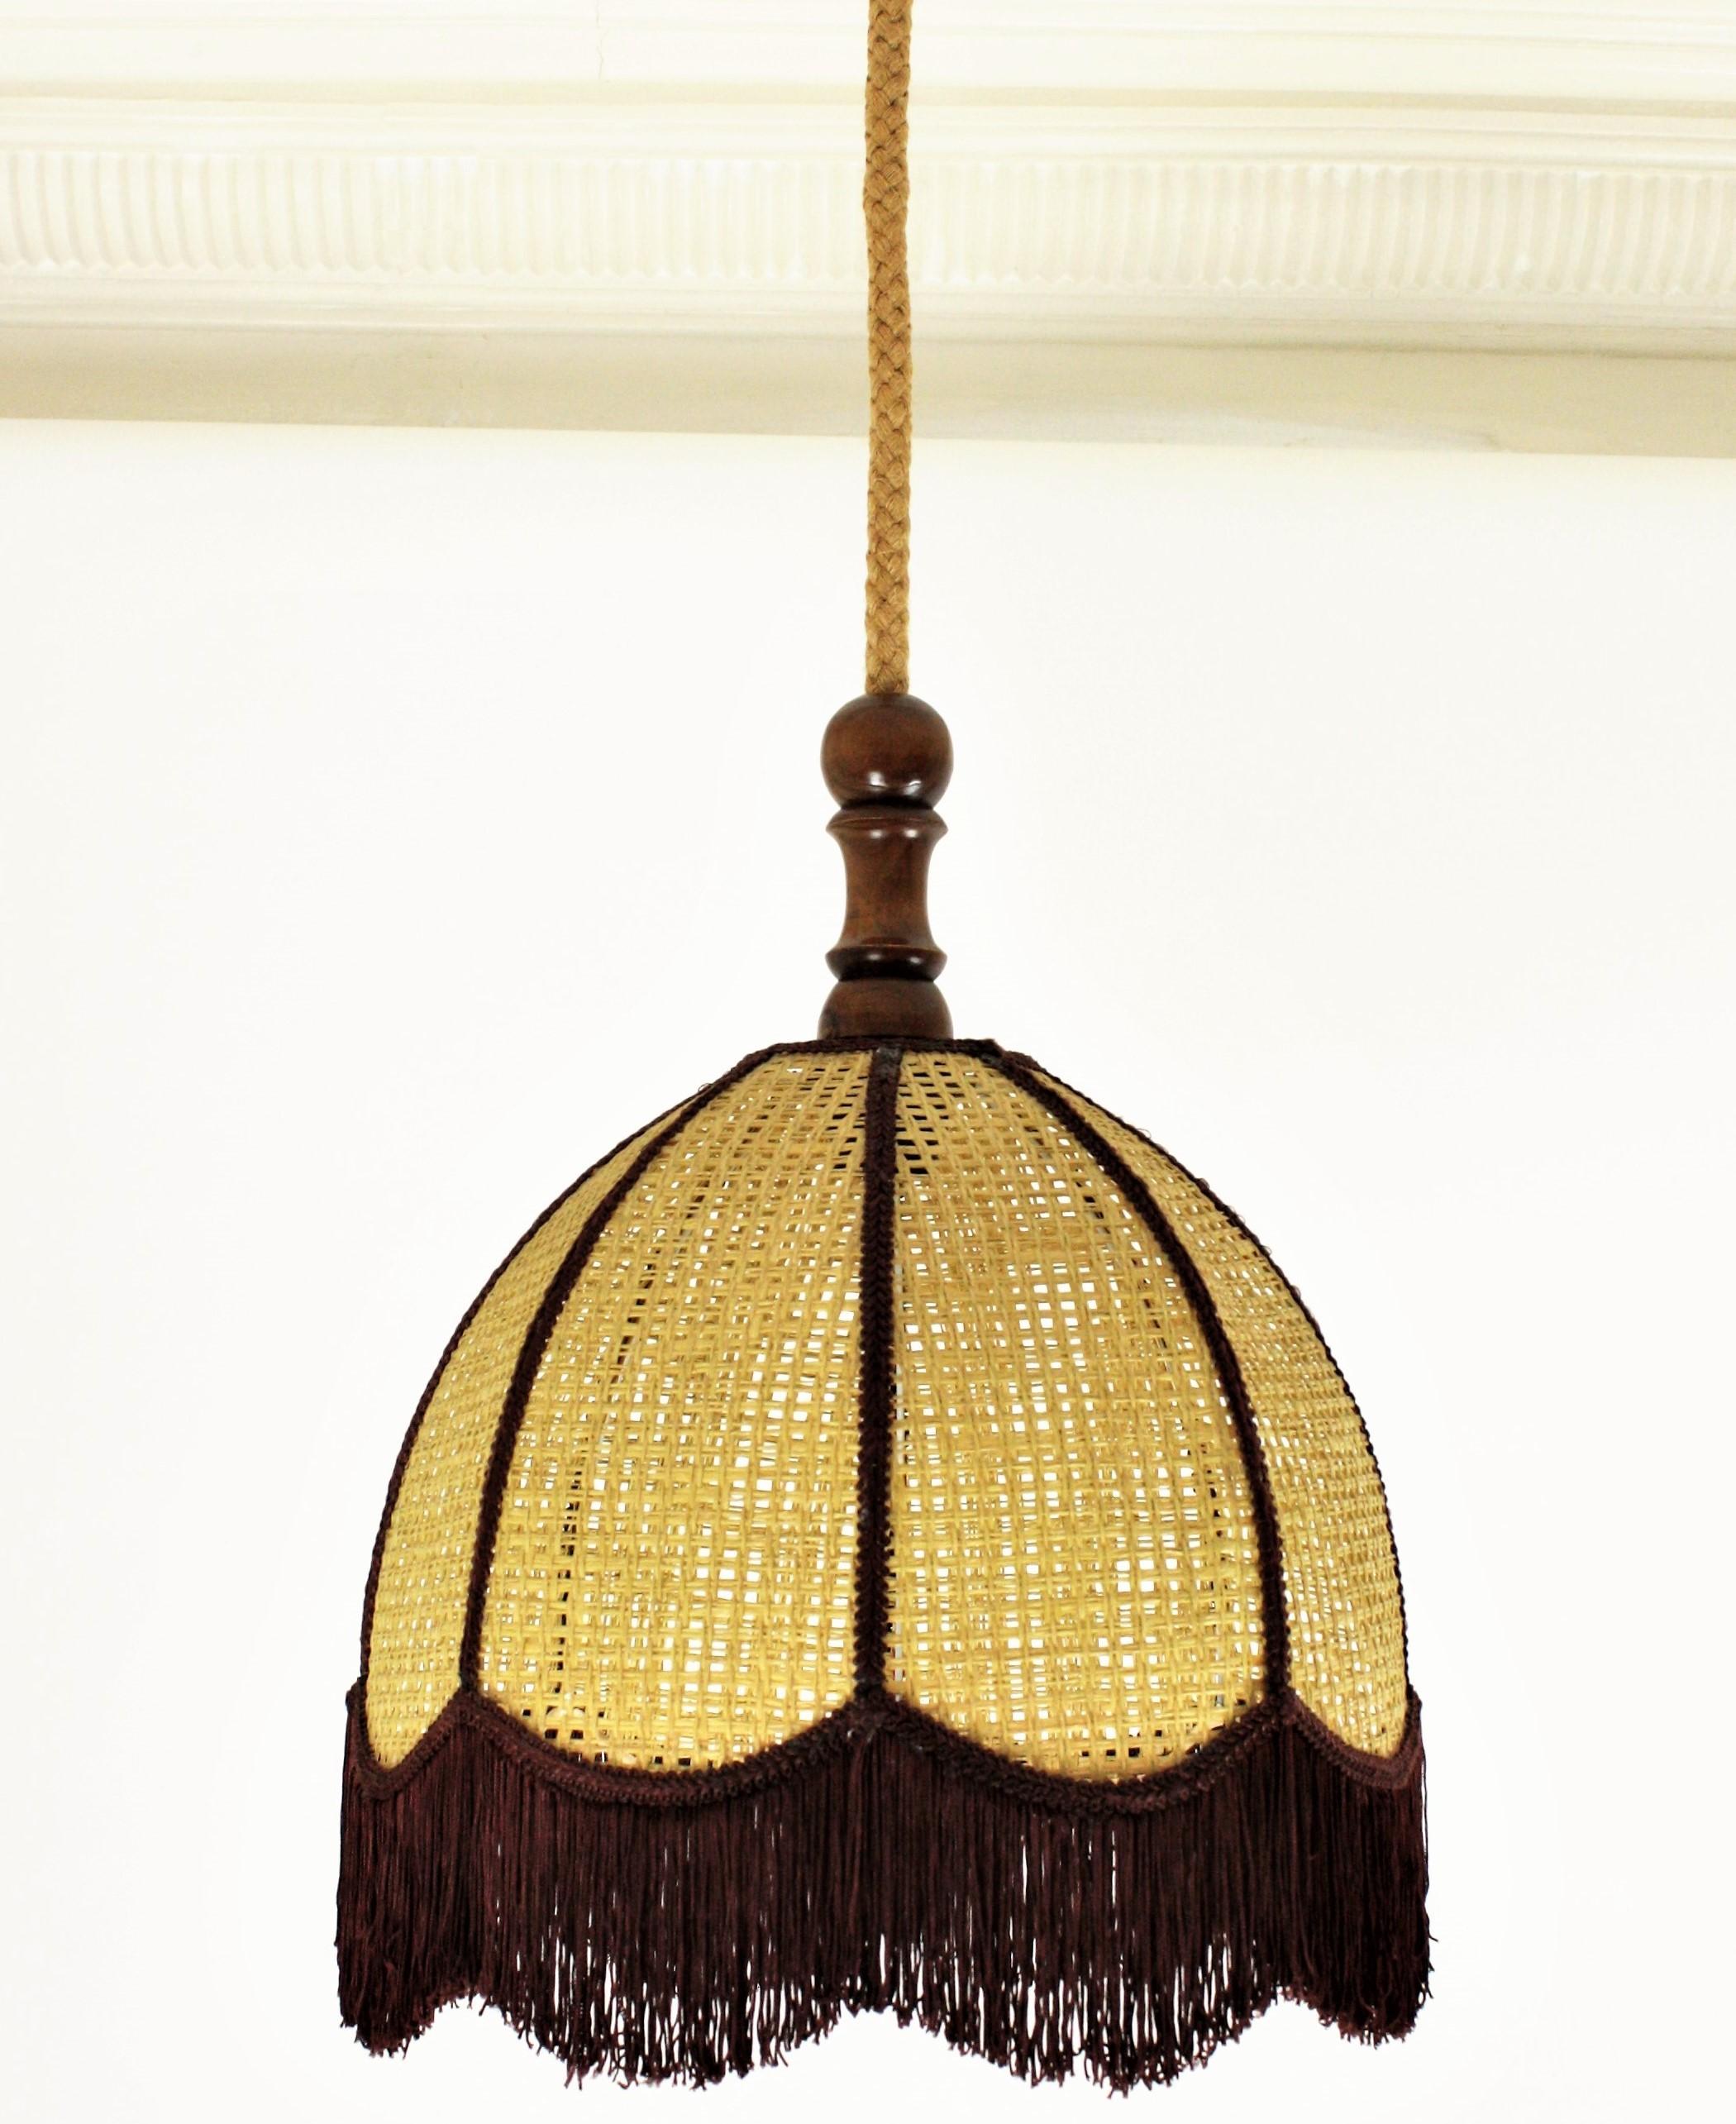 Rattan Wicker Bell Pendant Hanging Lamp with Fringe, Spain, 1970s 1